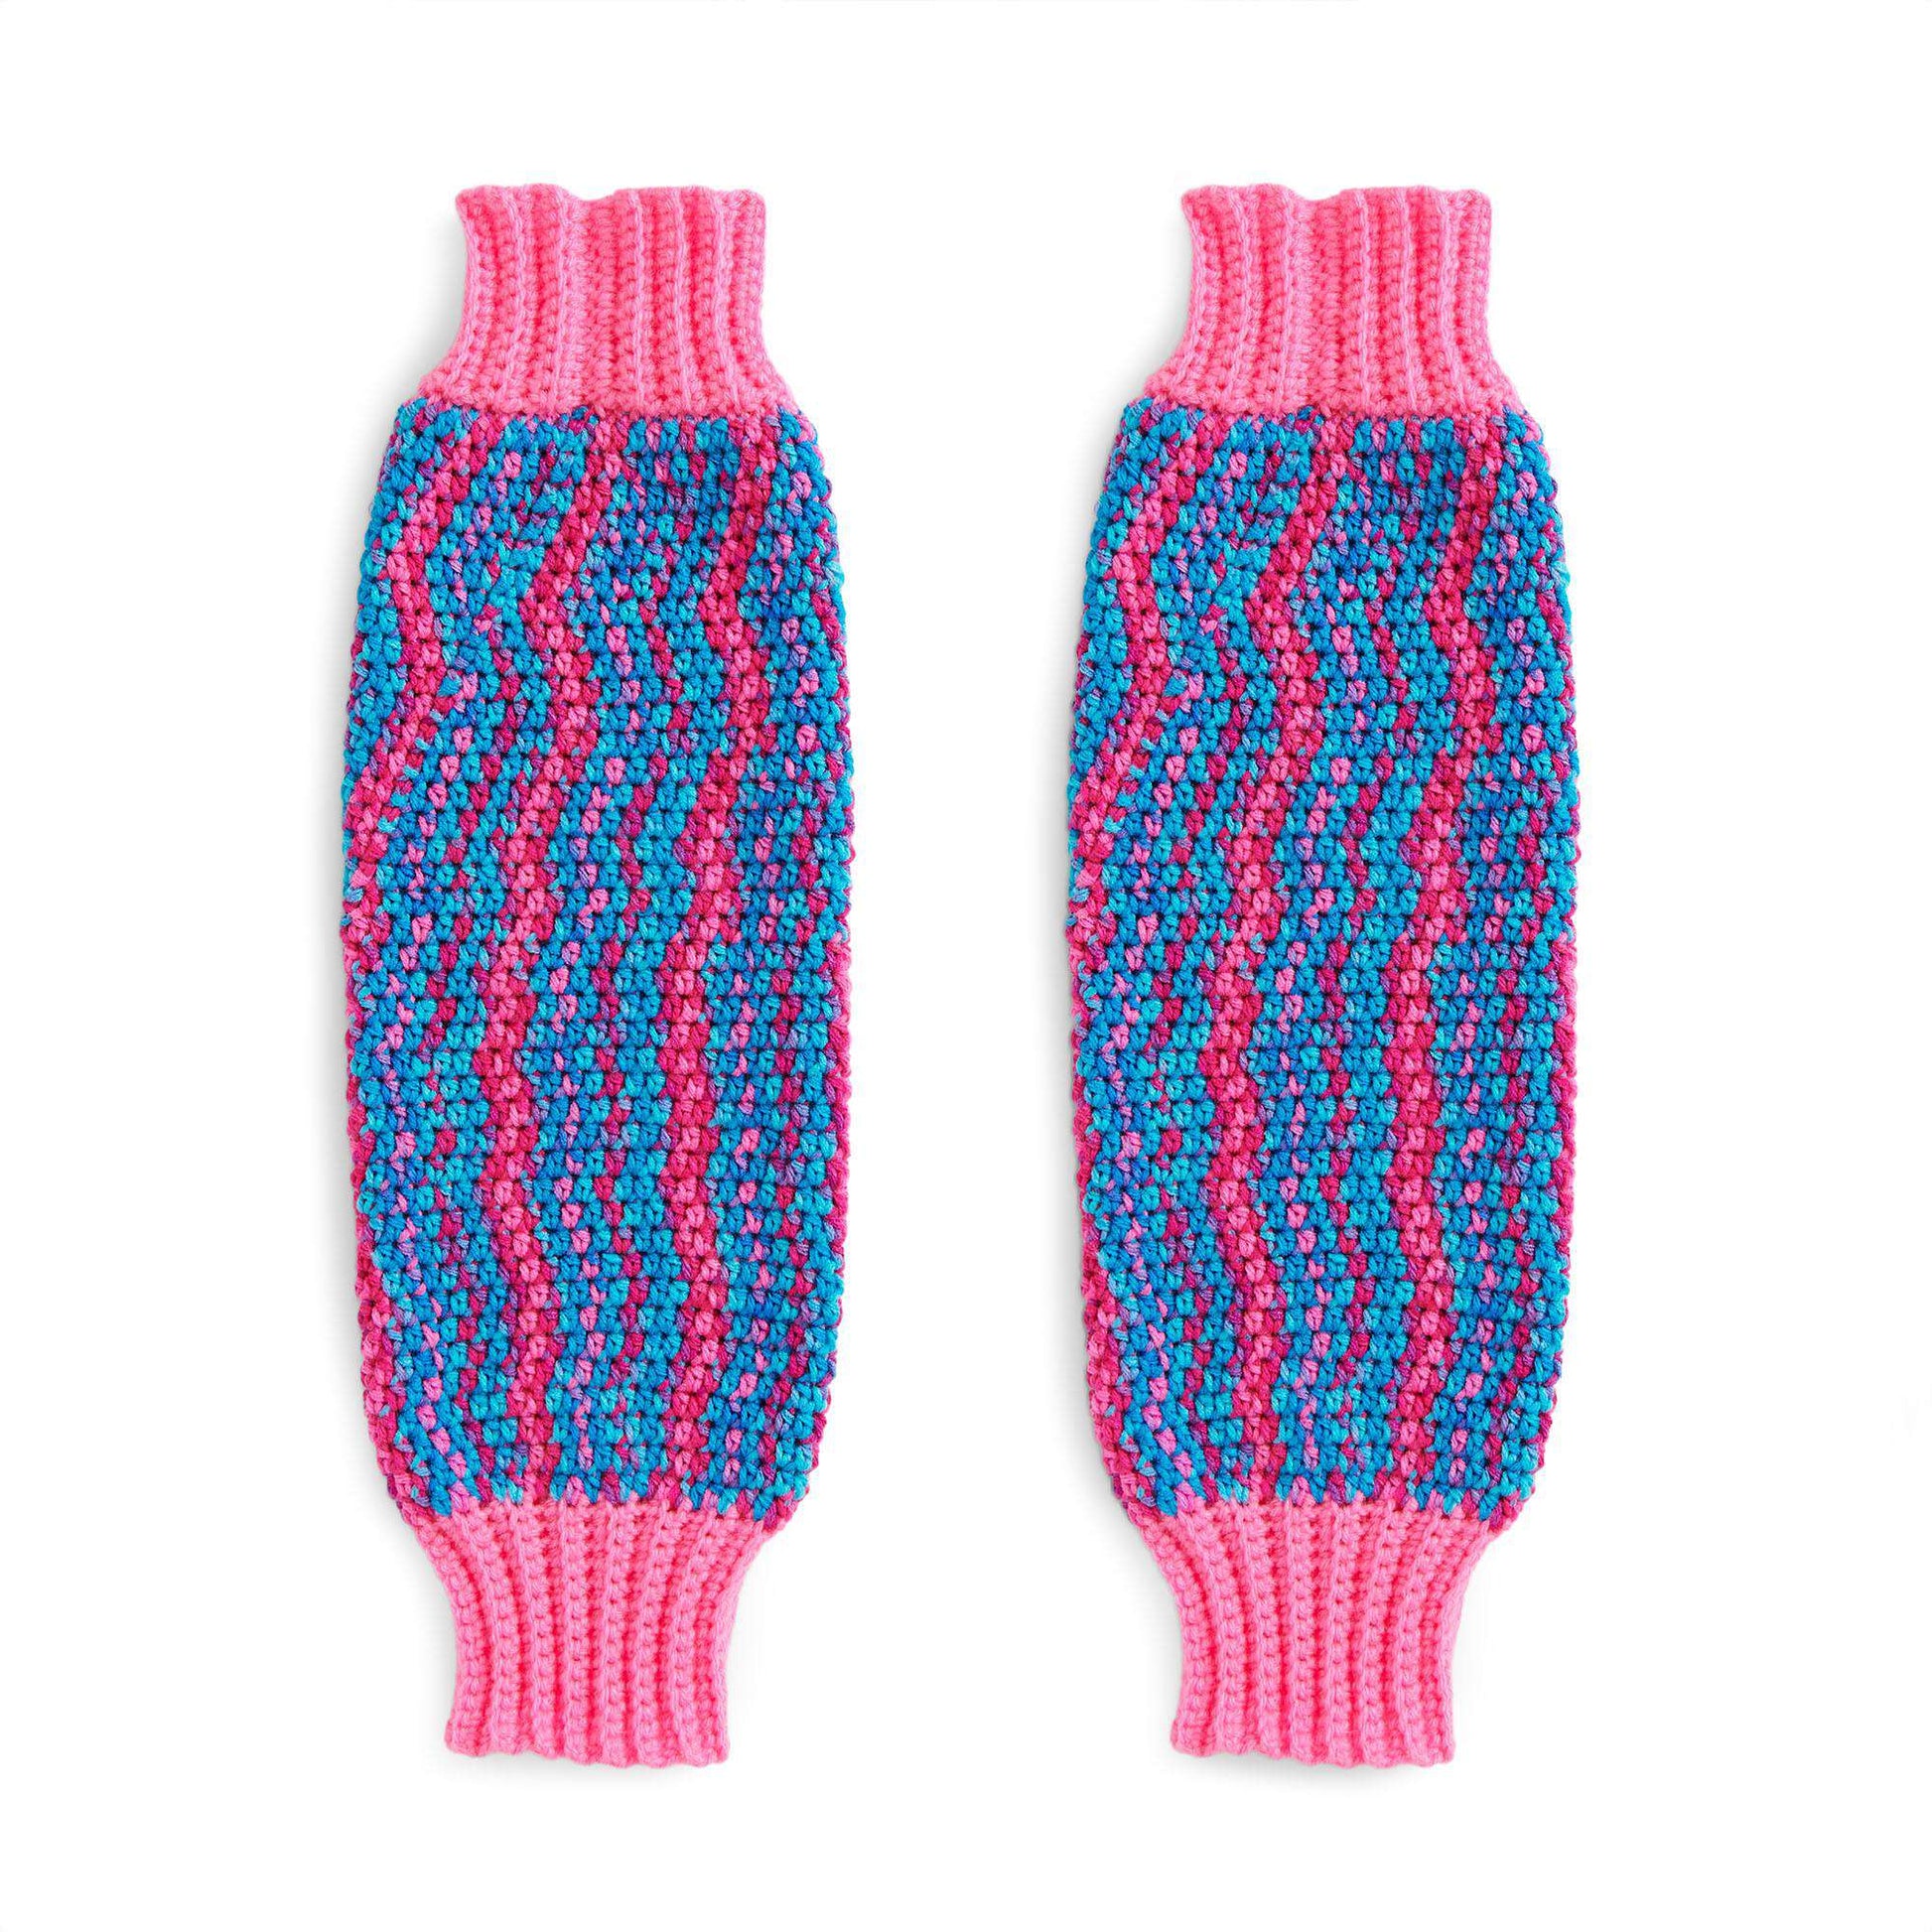 7 Free Crochet Leg Warmer Patterns Perfect For This Winter - The Yarn Crew